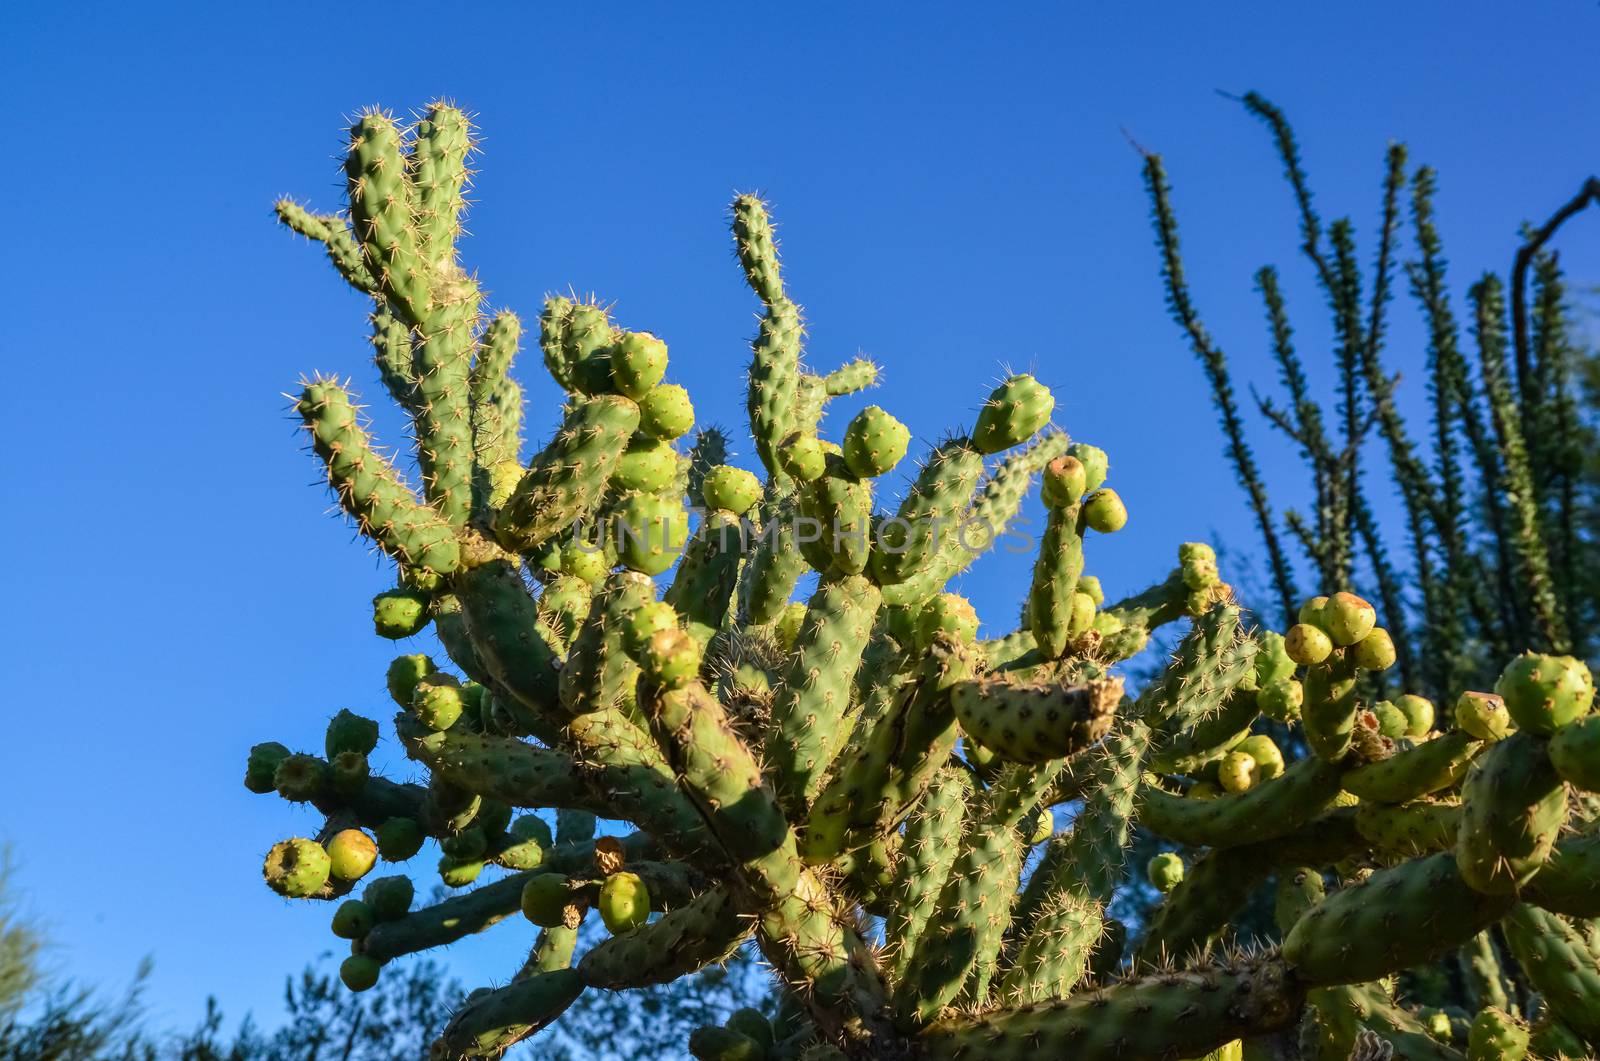 Cactus. Cane Chola Cylindropuntia on a background of blue sky. by Hydrobiolog